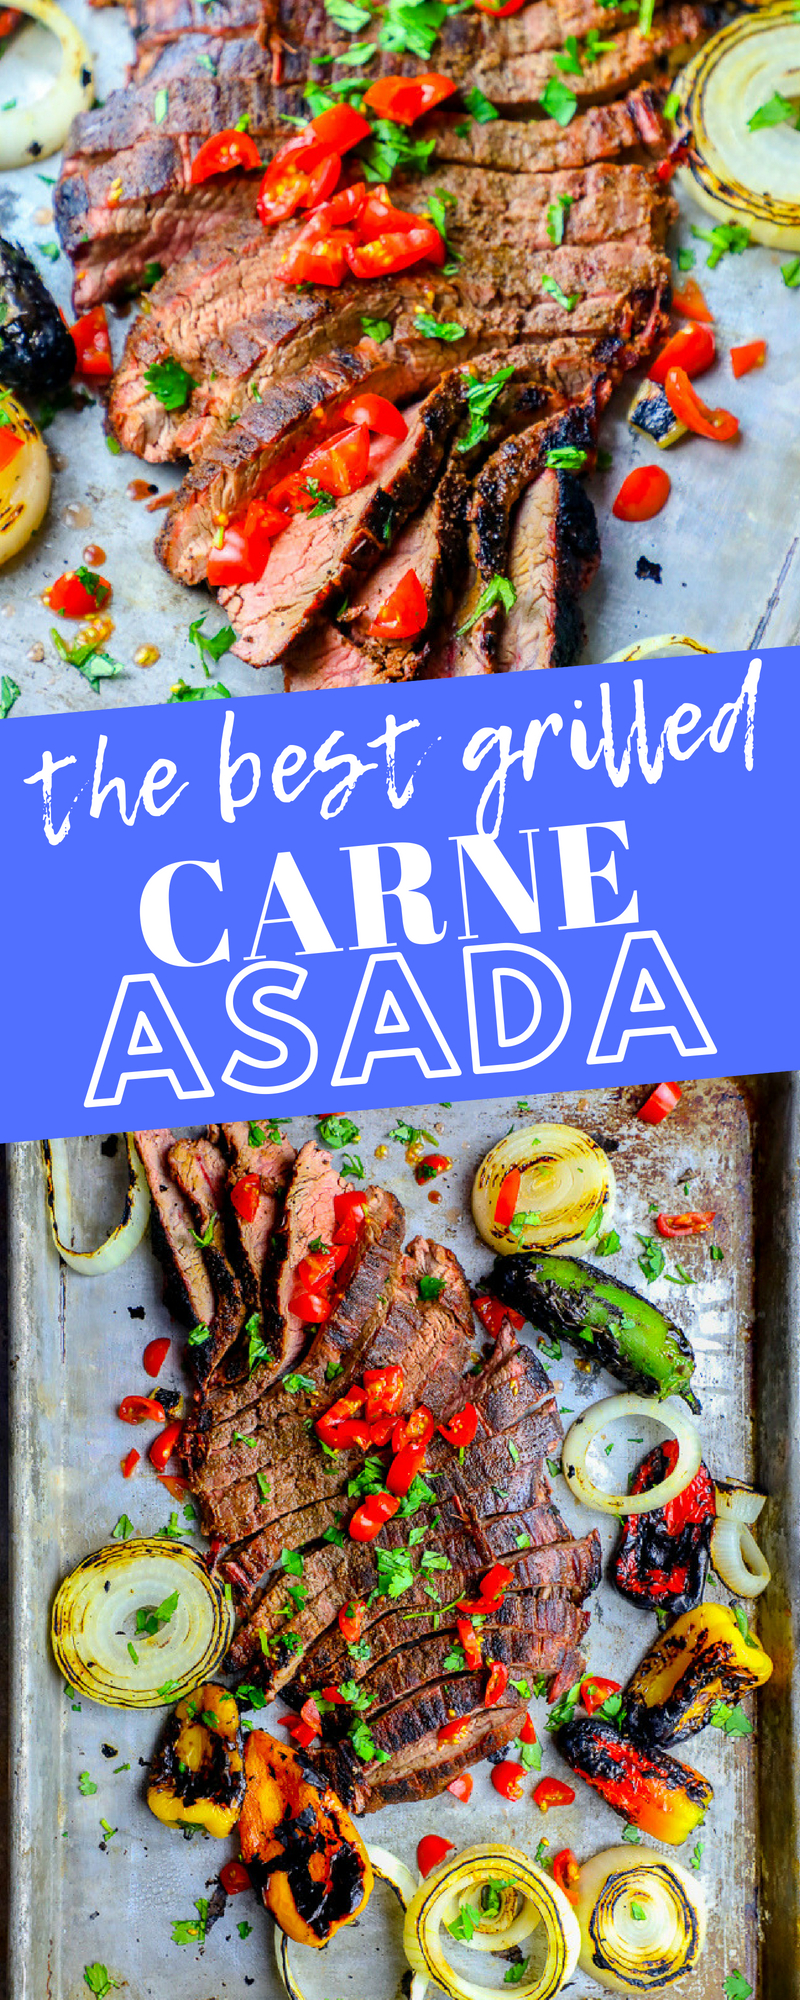 the best grilled carne asada for fajitas burritos tacos and more the best authentic carne asada recipe picture 1 How to grill carne asada